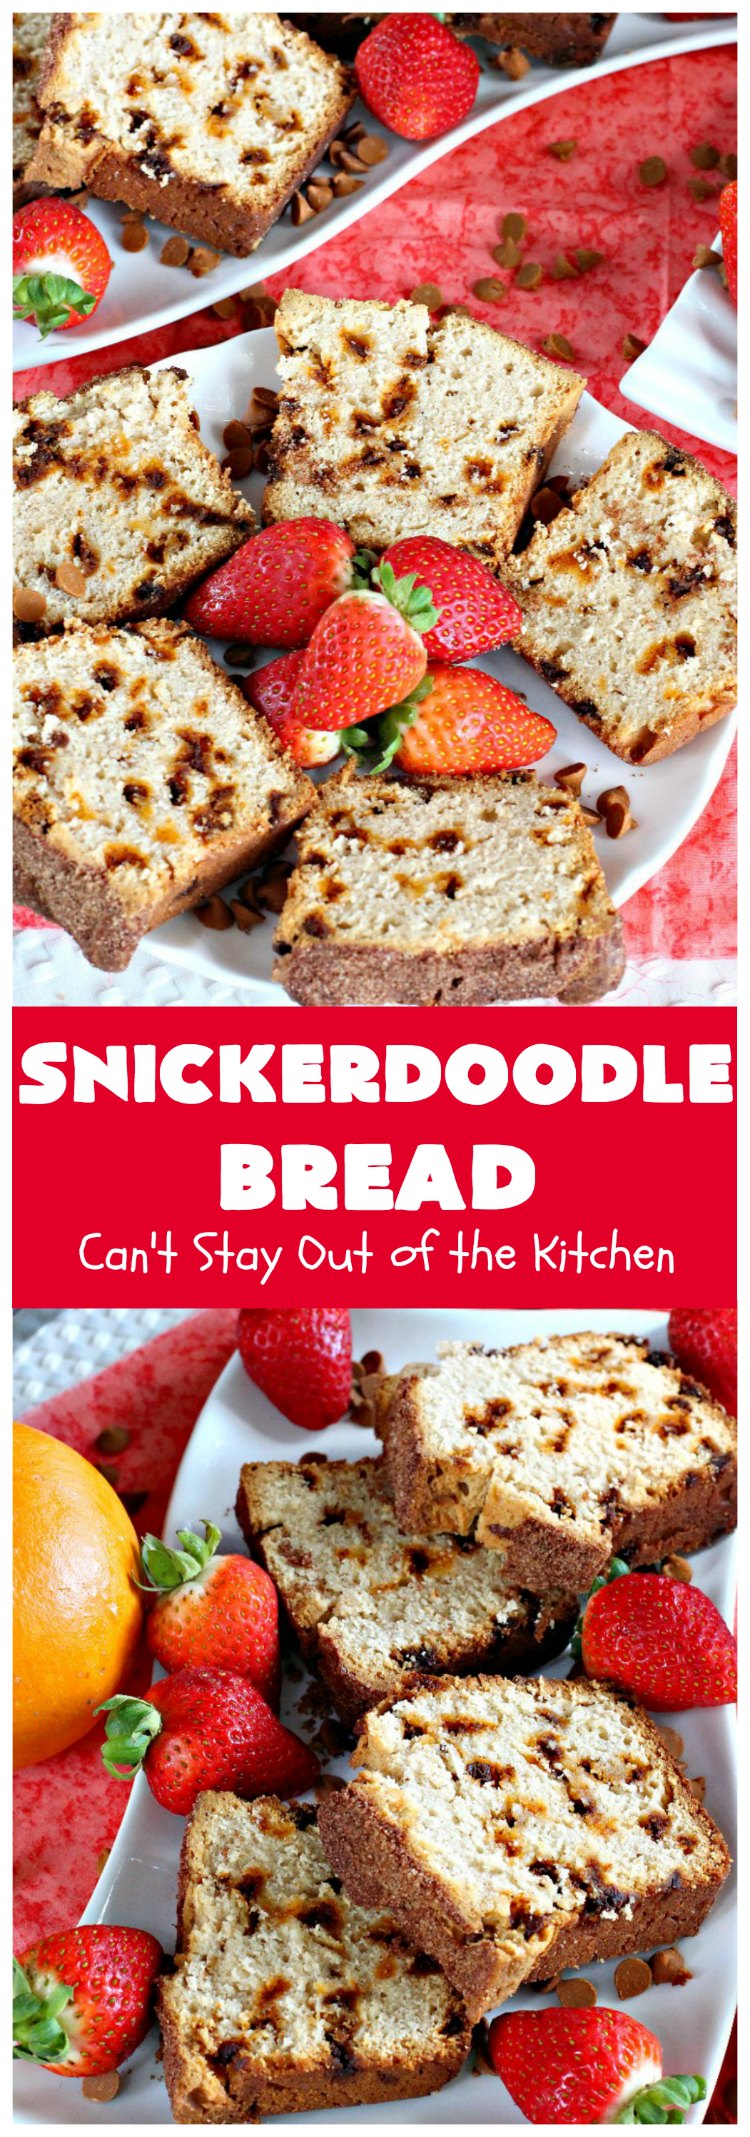 Snickerdoodle Bread | Can't Stay Out of the Kitchen